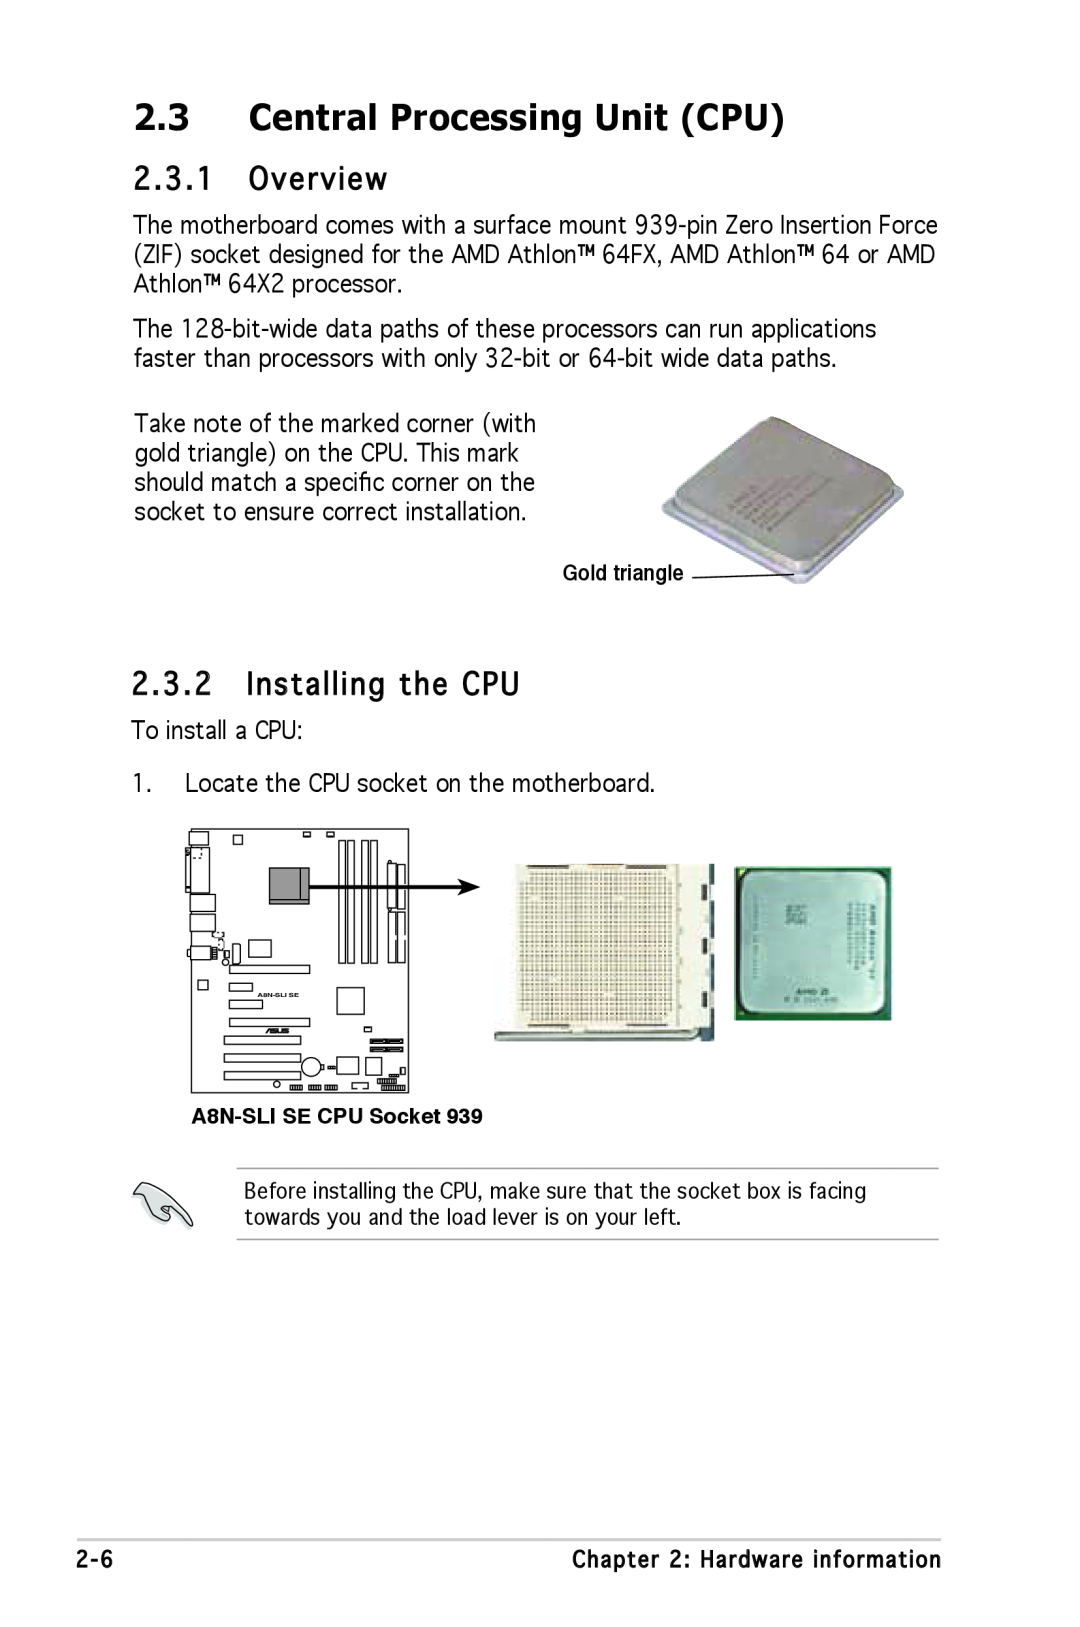 Asus A8N-SLI SE manual Central Processing Unit CPU, Overview, Installing the CPU, Gold triangle 